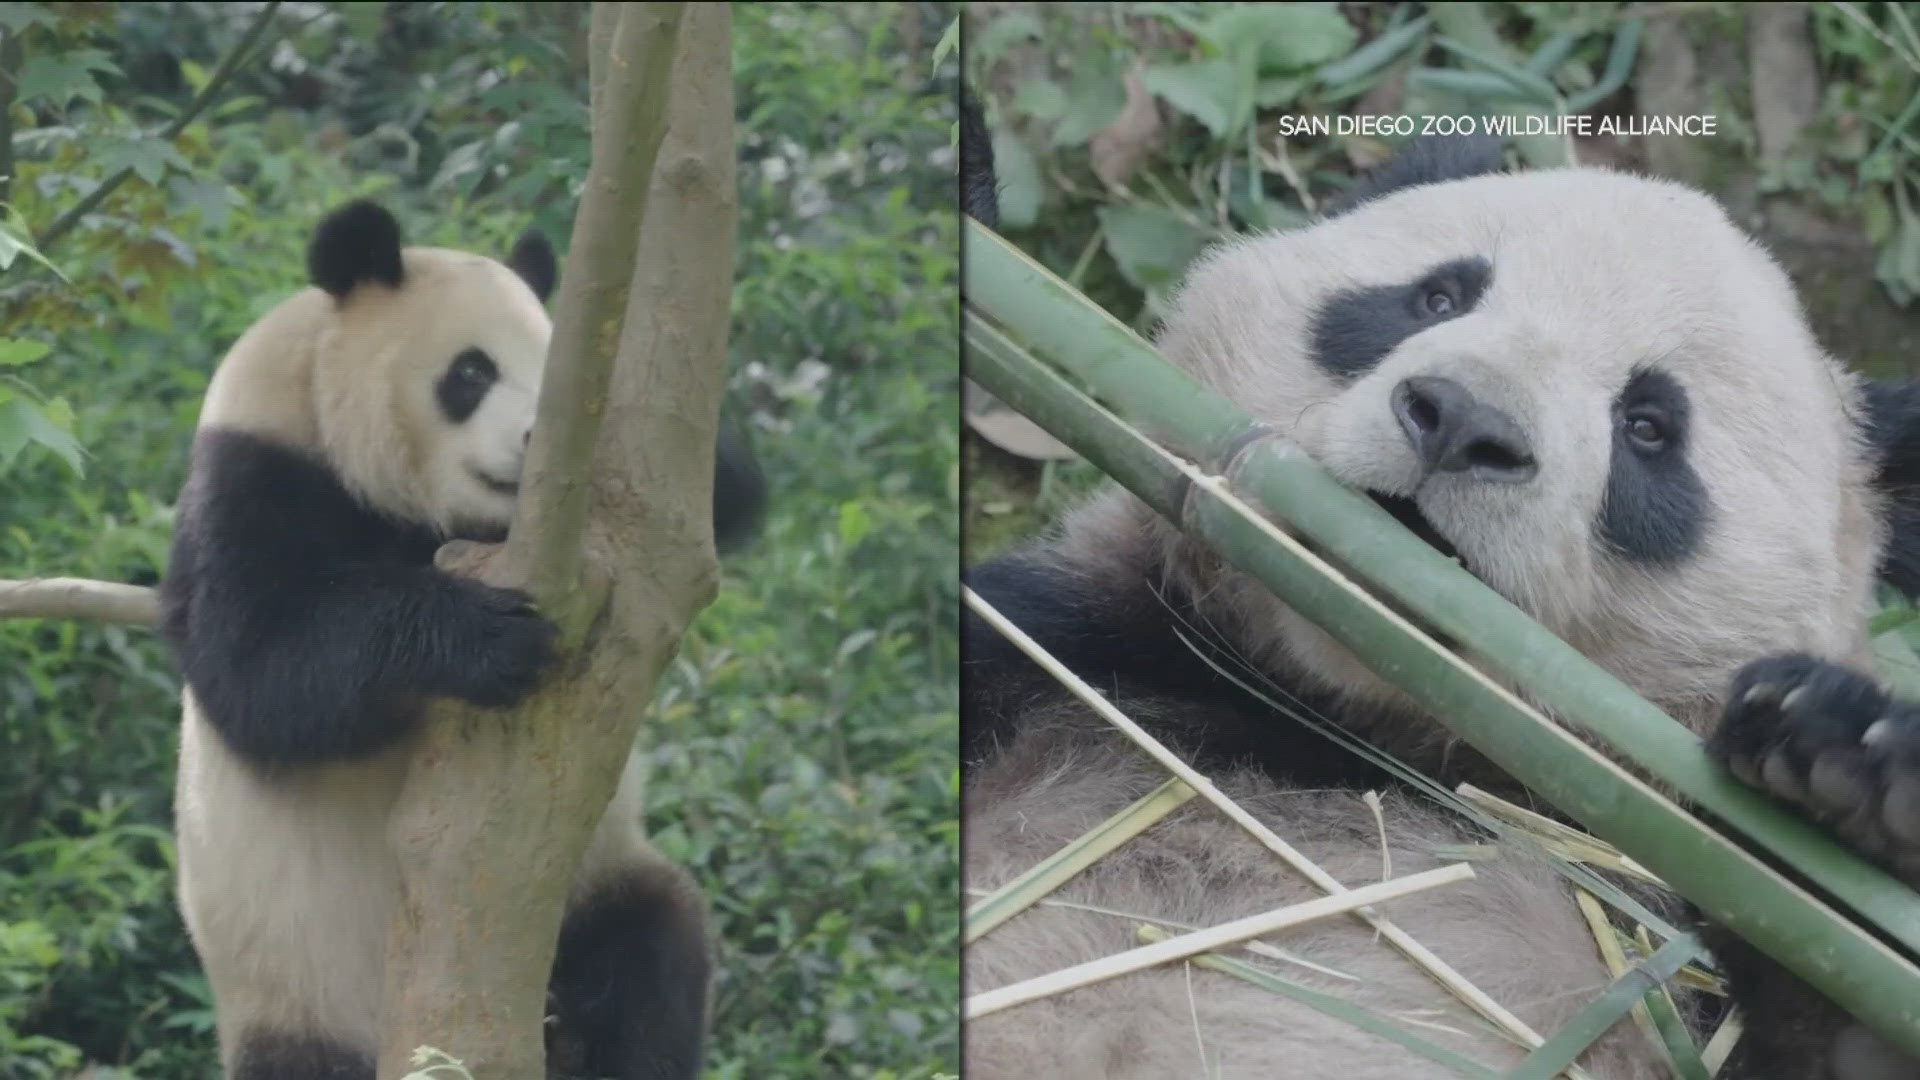 The 2 giant pandas quietly arrived in San Diego from China and are now acclimating at the San Diego Zoo.